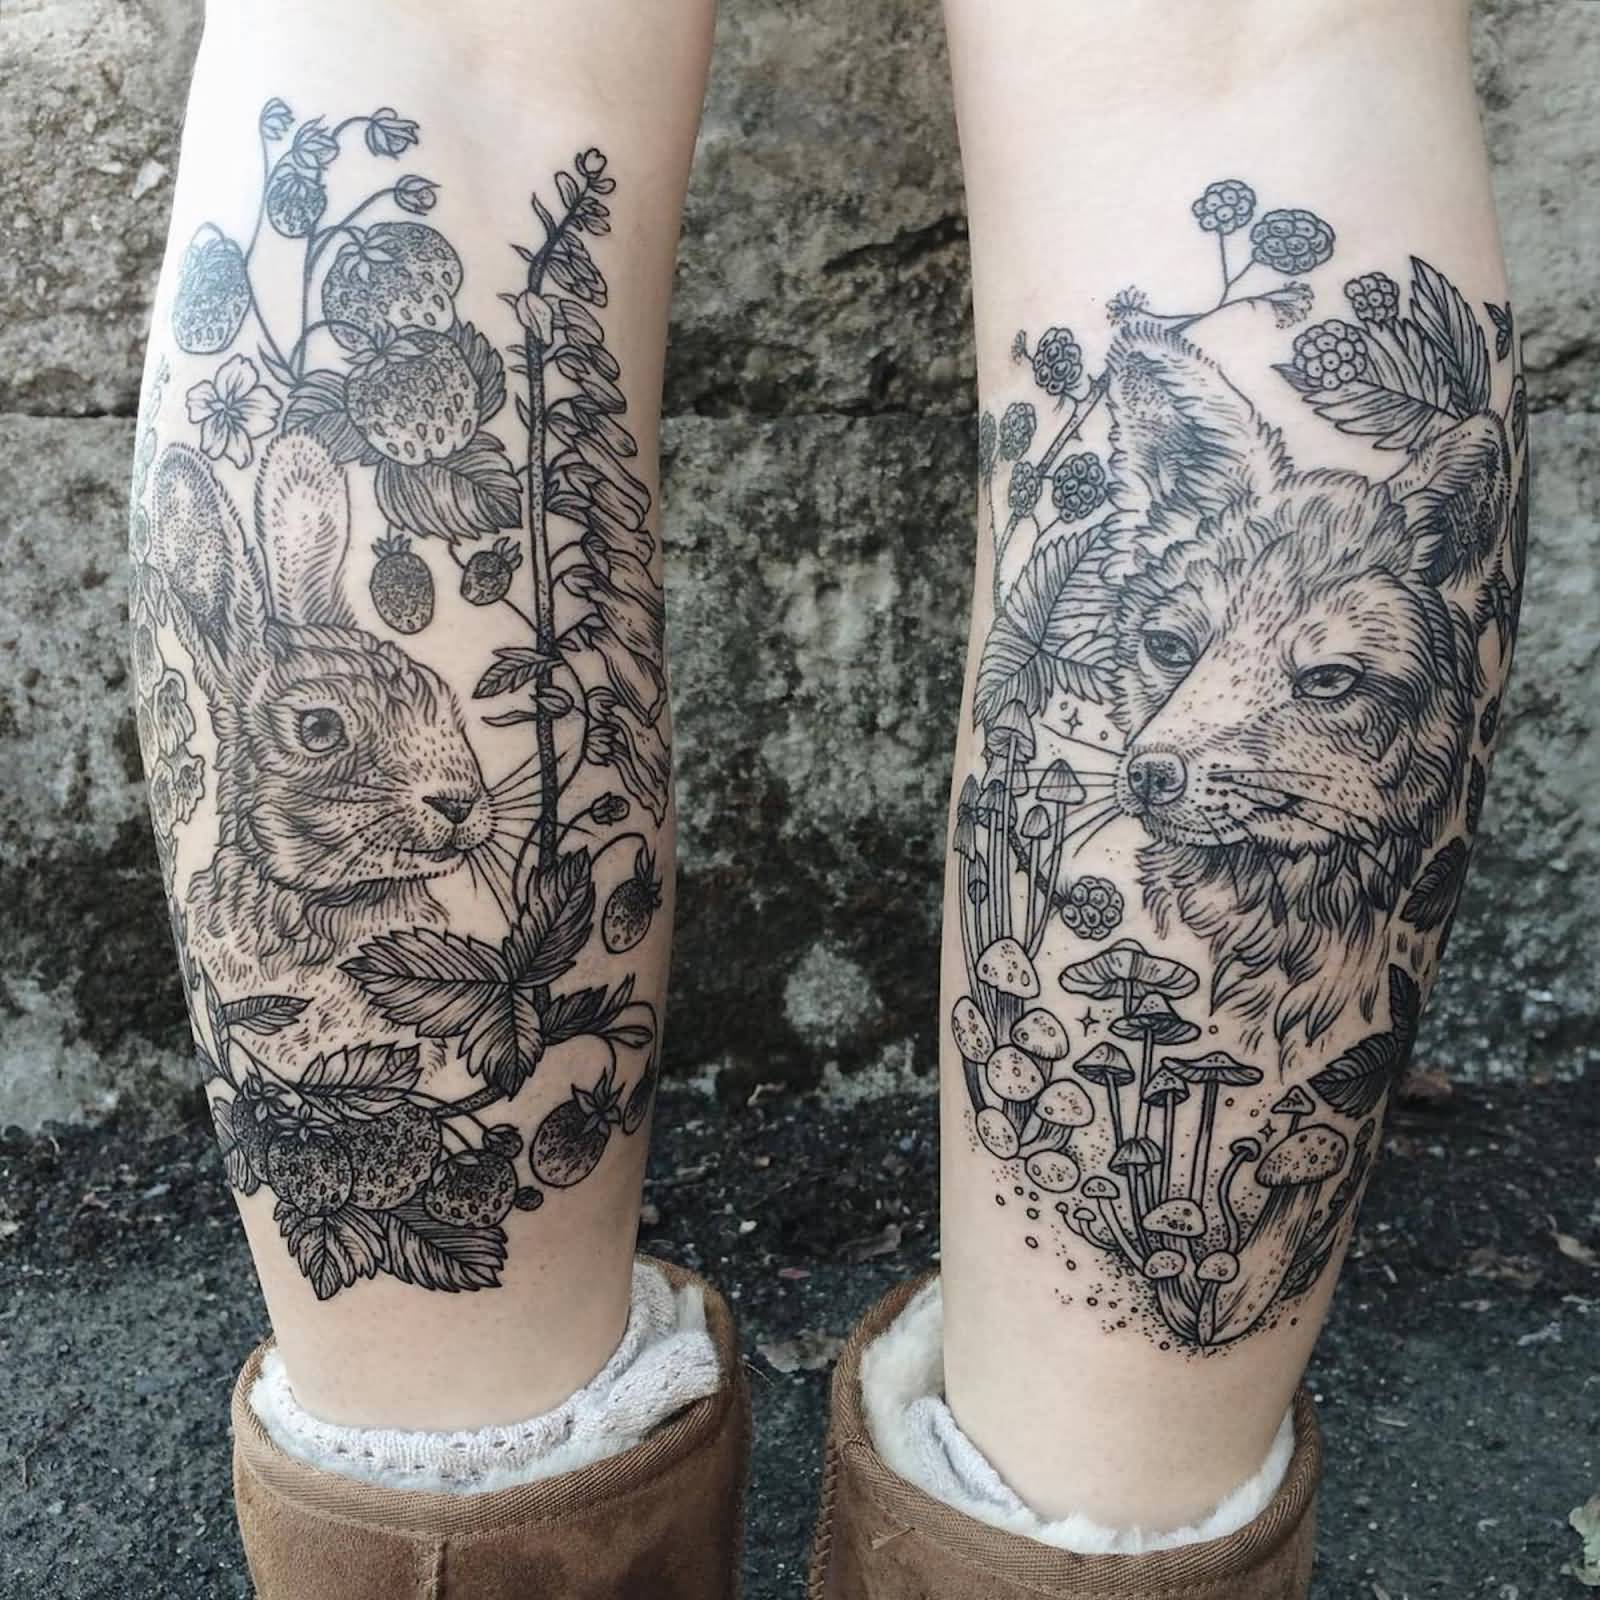 Black And Grey Bunny And Fox With Plants Tattoo On Back Leg